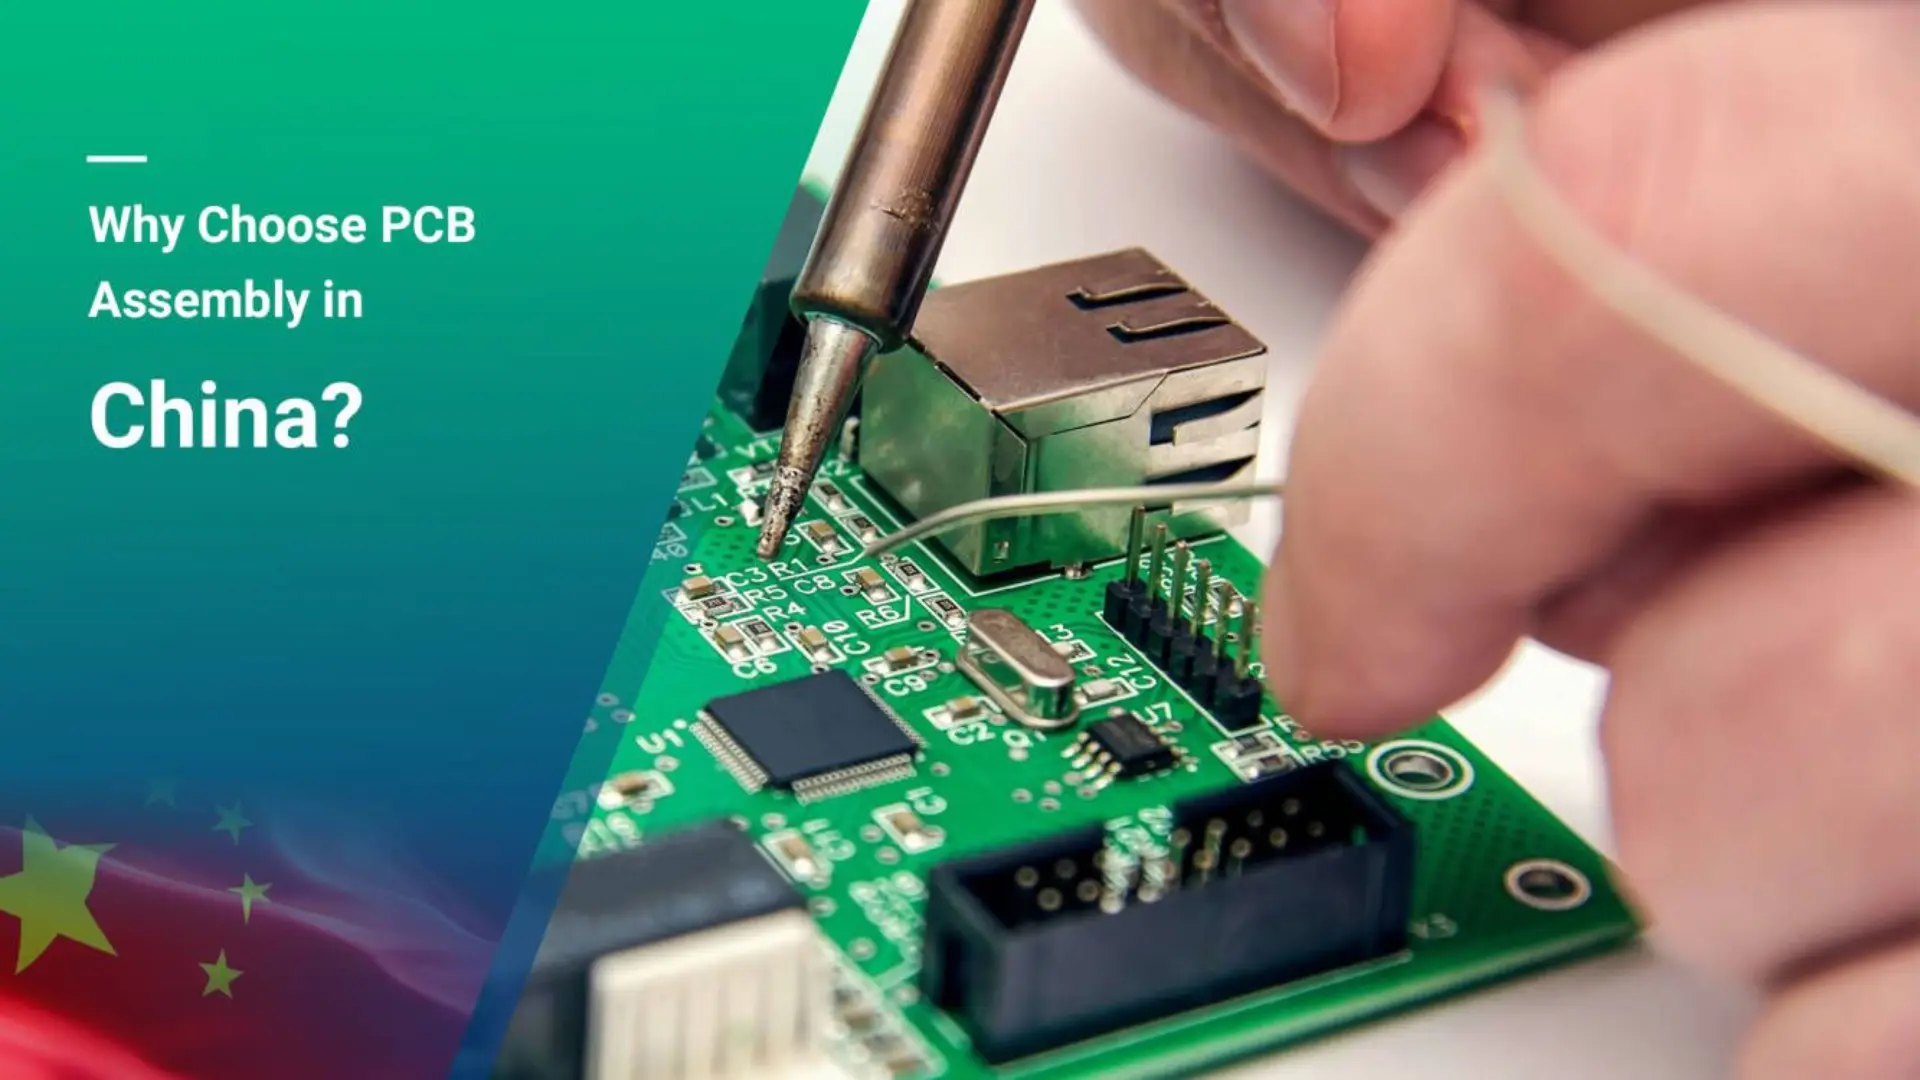 Why Choose PCB Assembly in China